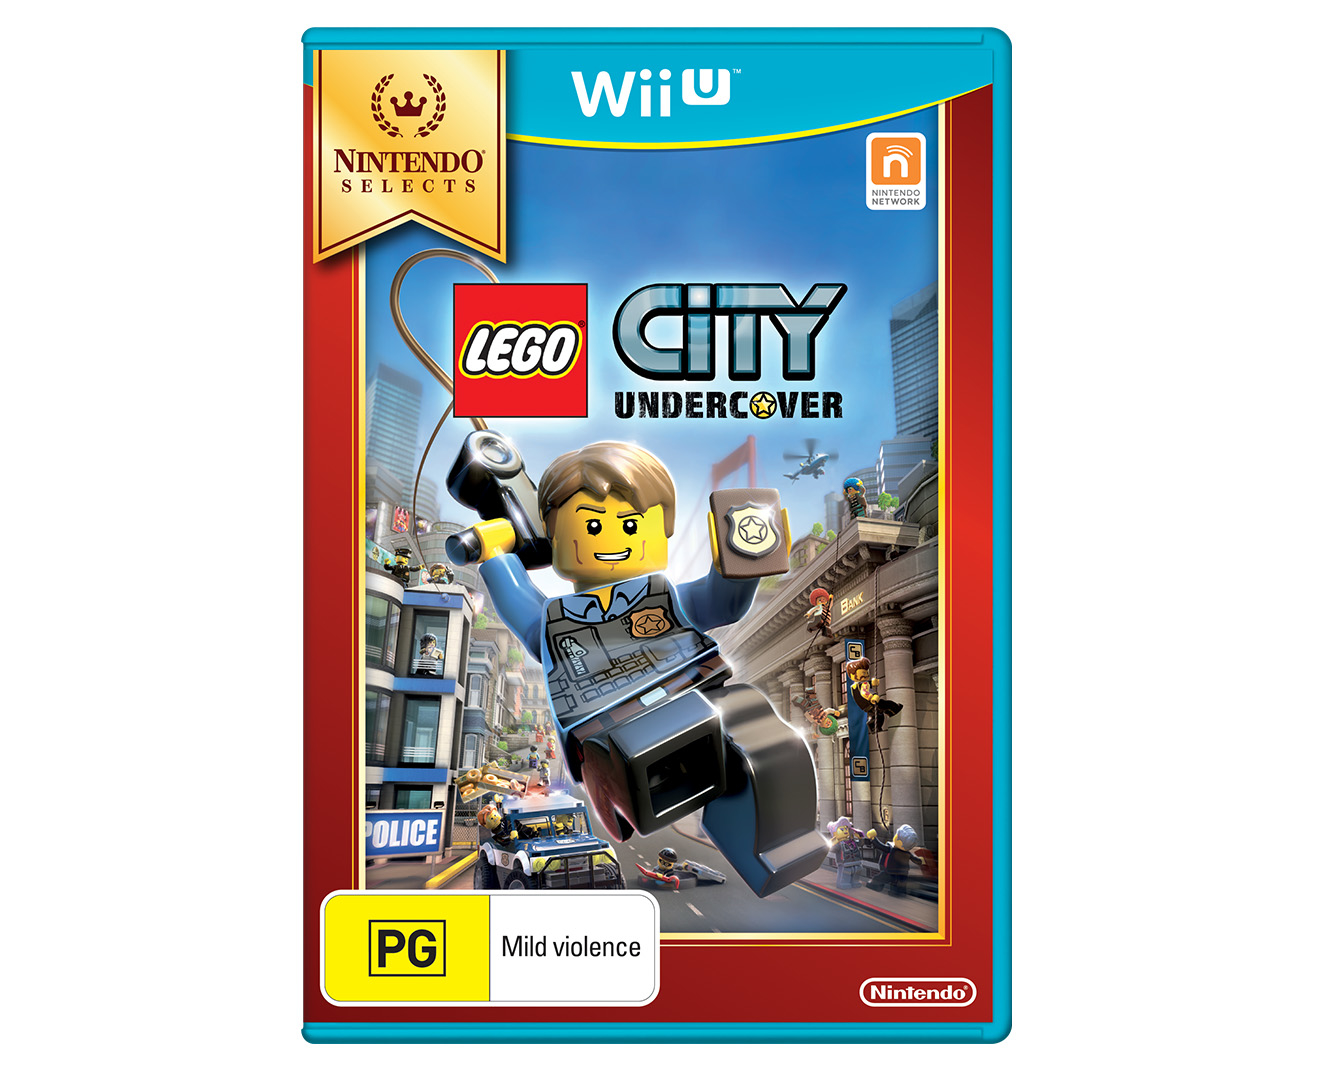 Nintendo Wii U Selects: LEGO® City Undercover Game